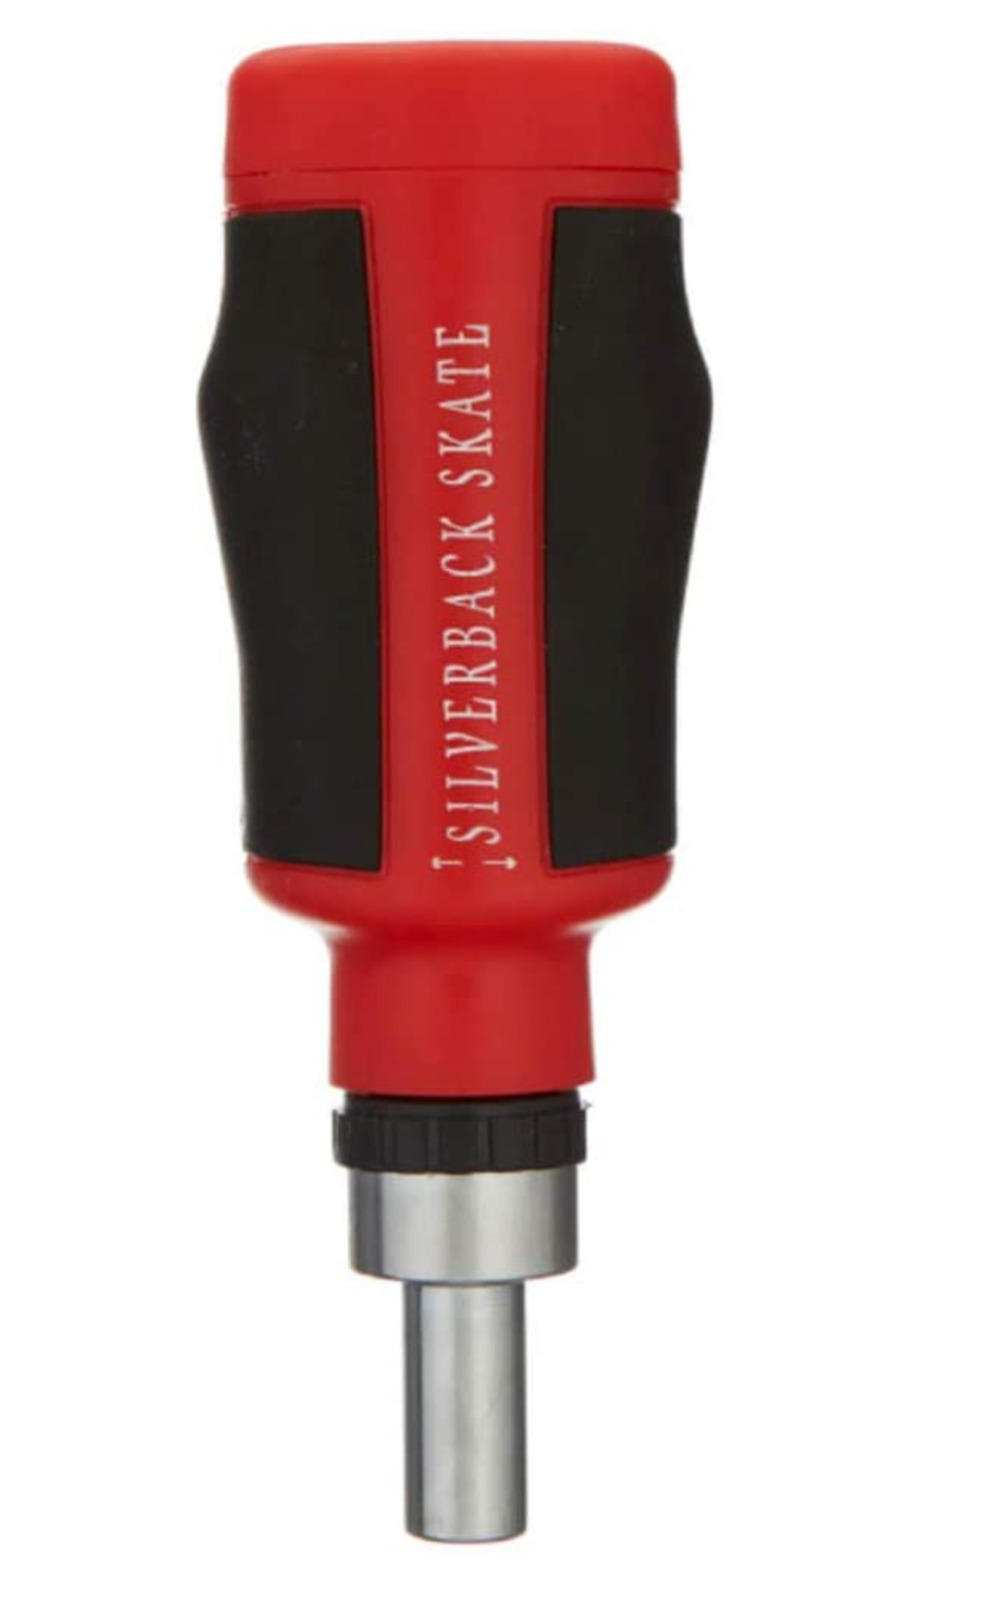 Silverback Skate All In One Ratchet Tool - Red